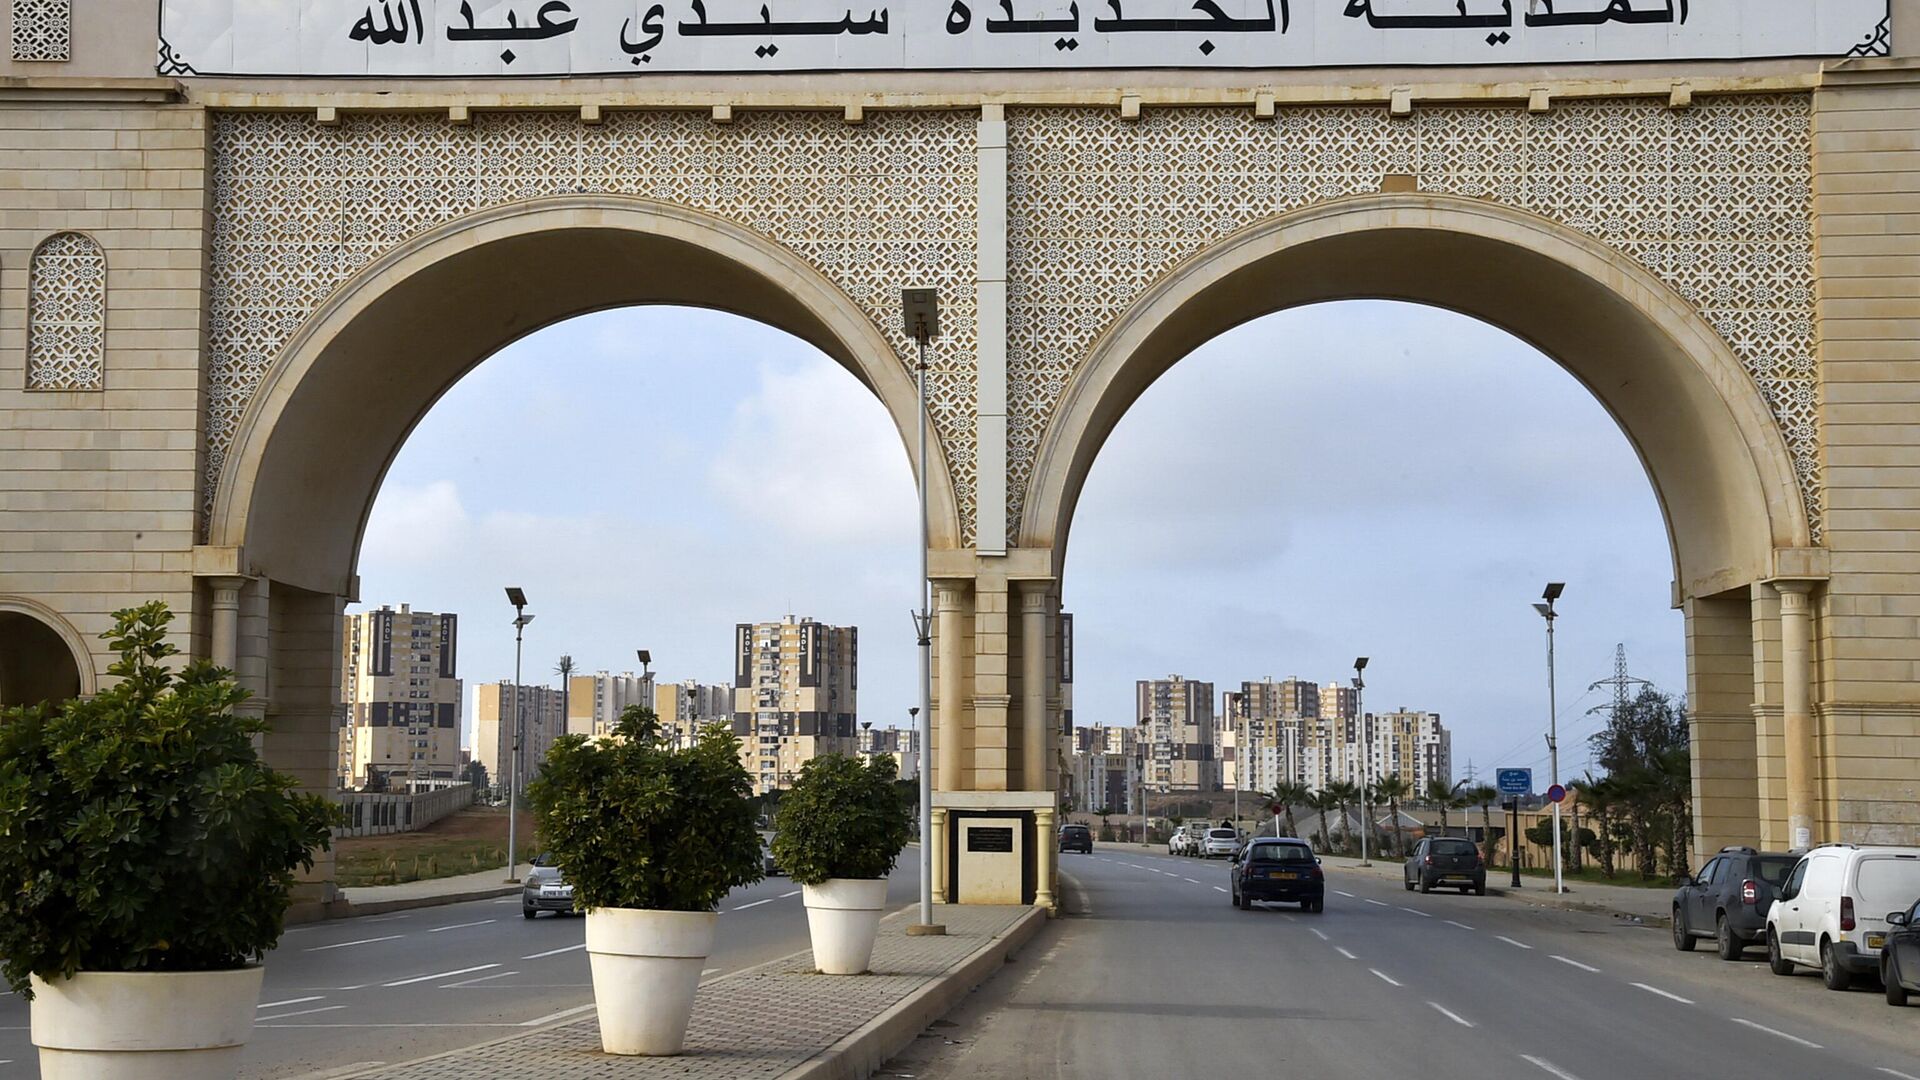 This picture taken on December 29, 2022 shows a view of the entry gate to the new city of Sidi Abdellah, located 25 kilometres west of Algeria's capital. - The new town is expected to have 90,000 dwellings in an area of 7,000 hectares, with an expected population of 450,000 - Sputnik International, 1920, 09.04.2023